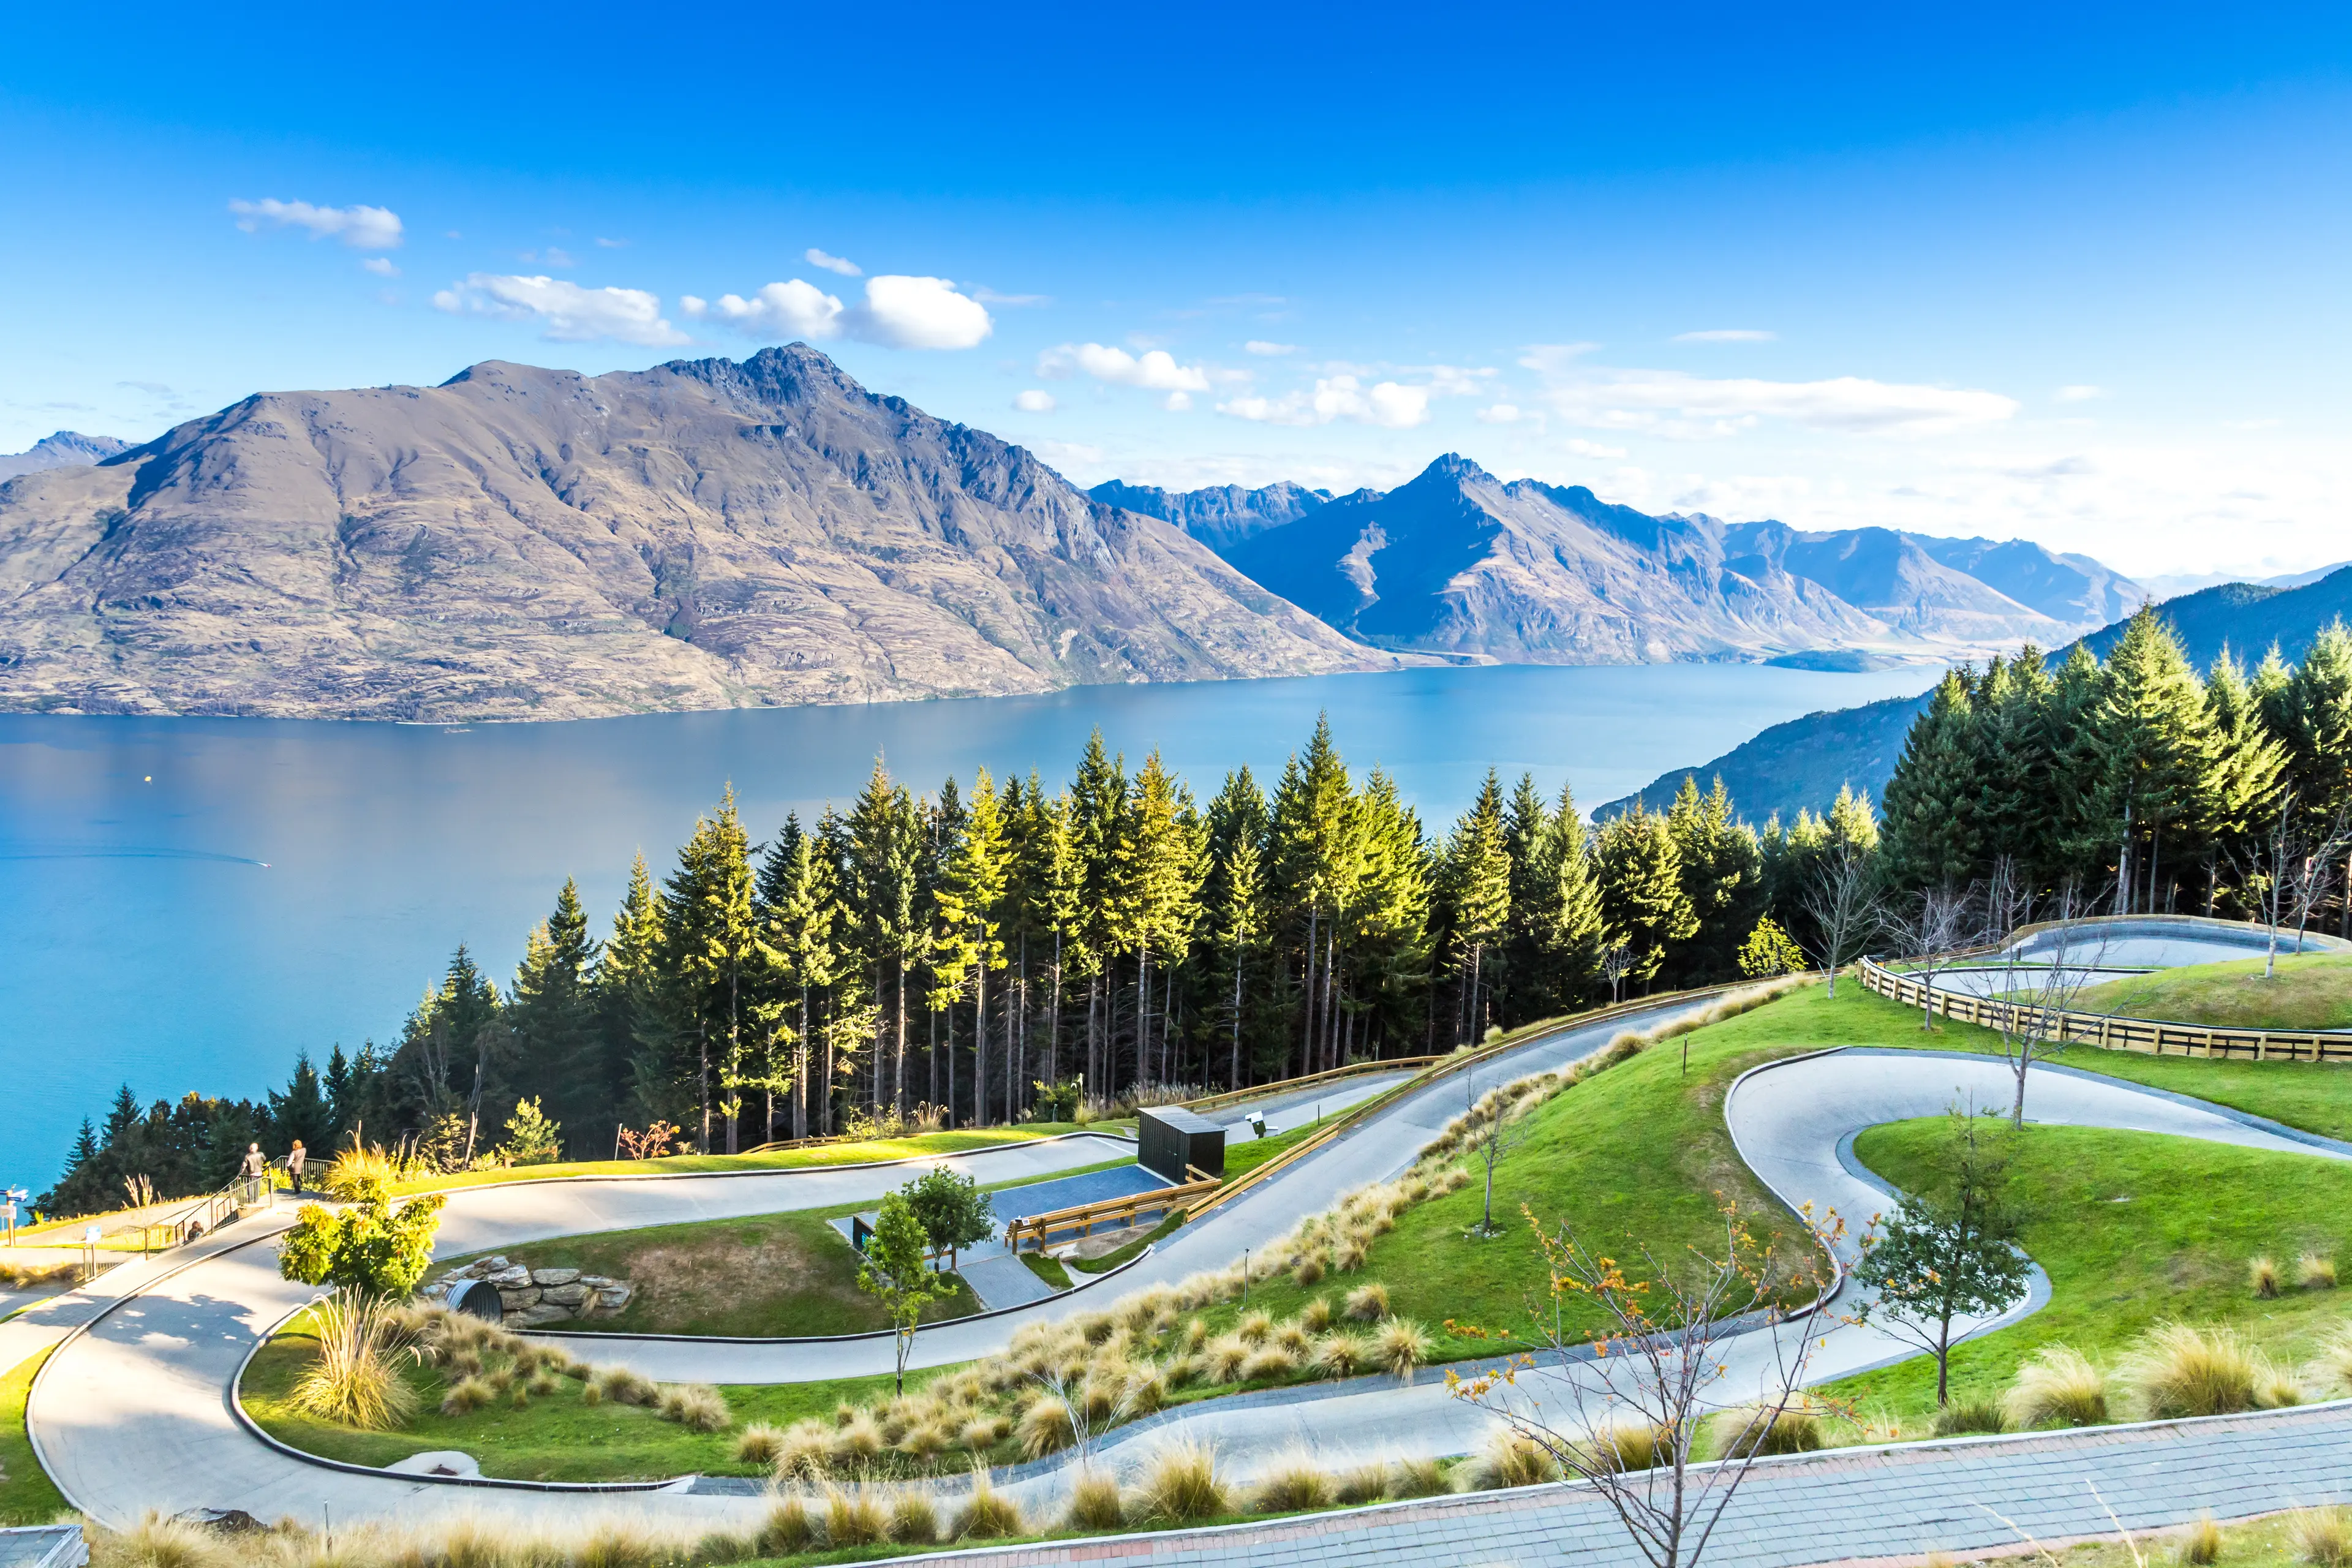 3-Day Local Experience: Shopping, Dining, Relaxing in Queenstown